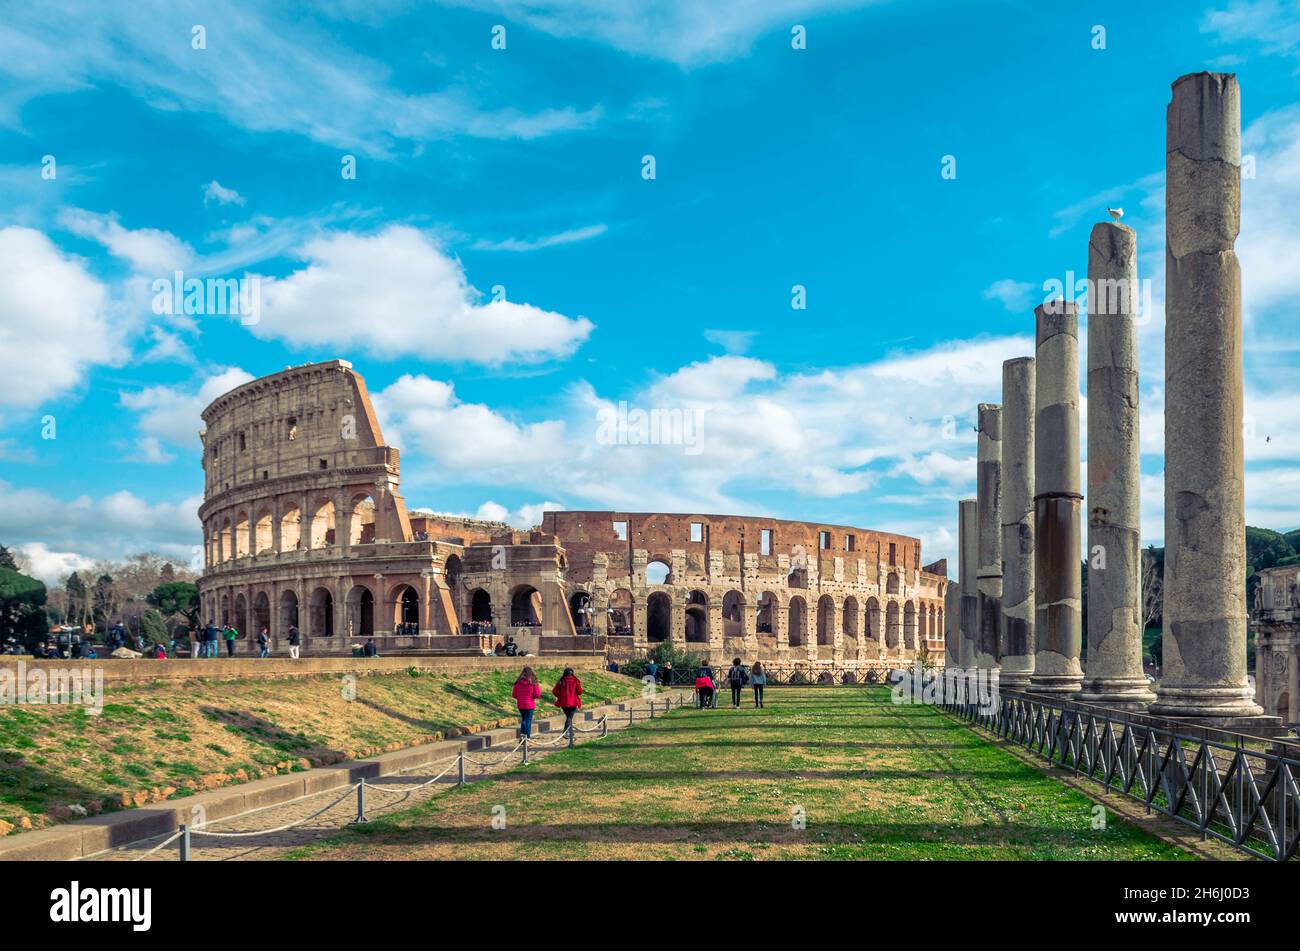 View of Colosseum,the worldwide famous site and one of the most important sights of Rome. Stock Photo